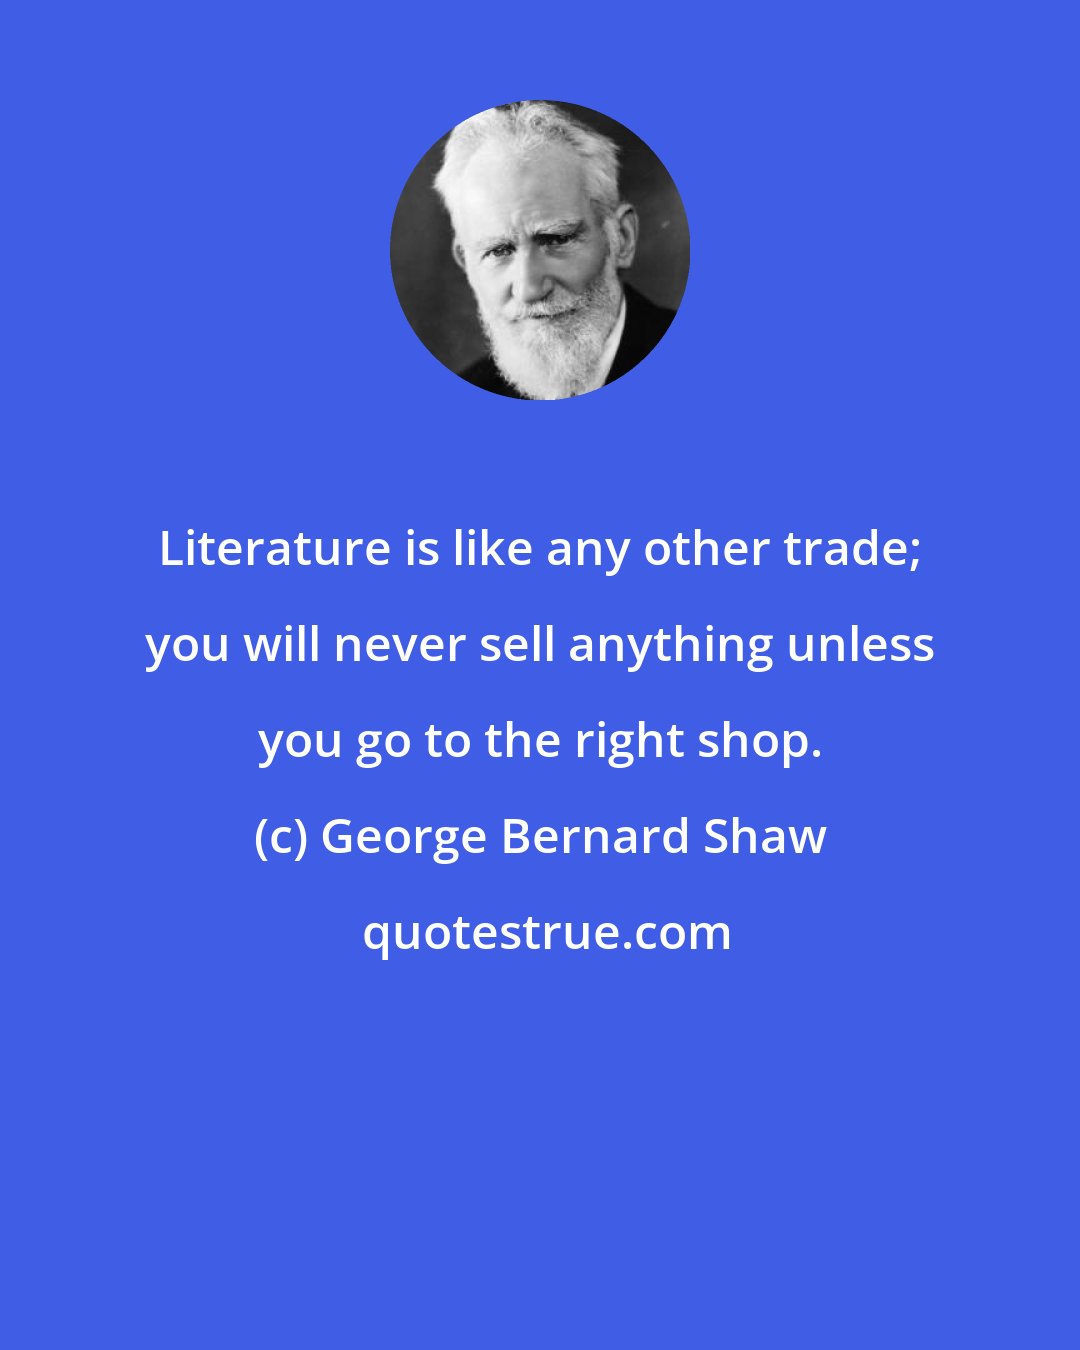 George Bernard Shaw: Literature is like any other trade; you will never sell anything unless you go to the right shop.